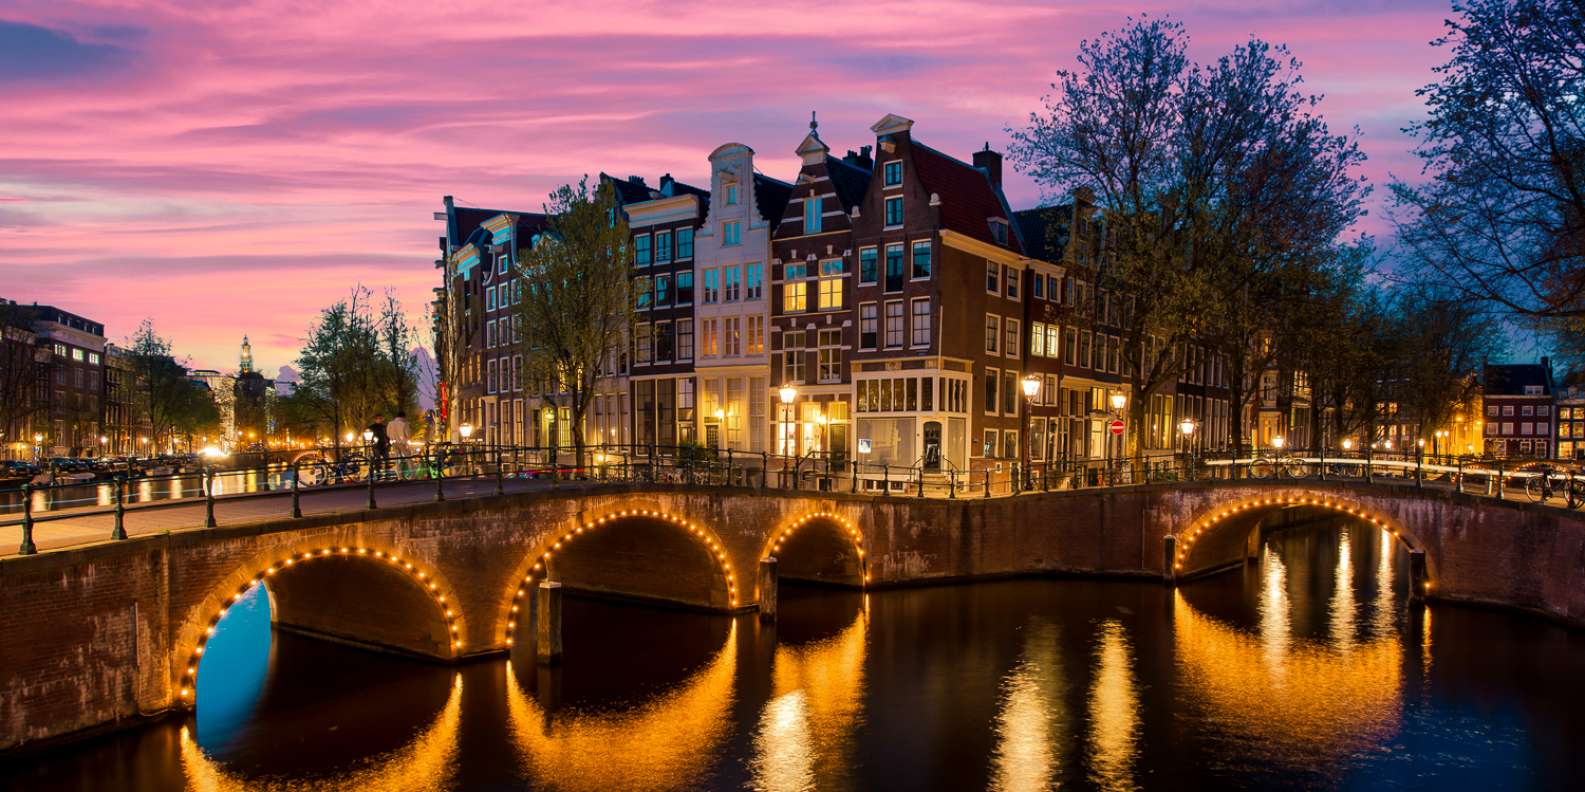 best things to do in Amsterdam